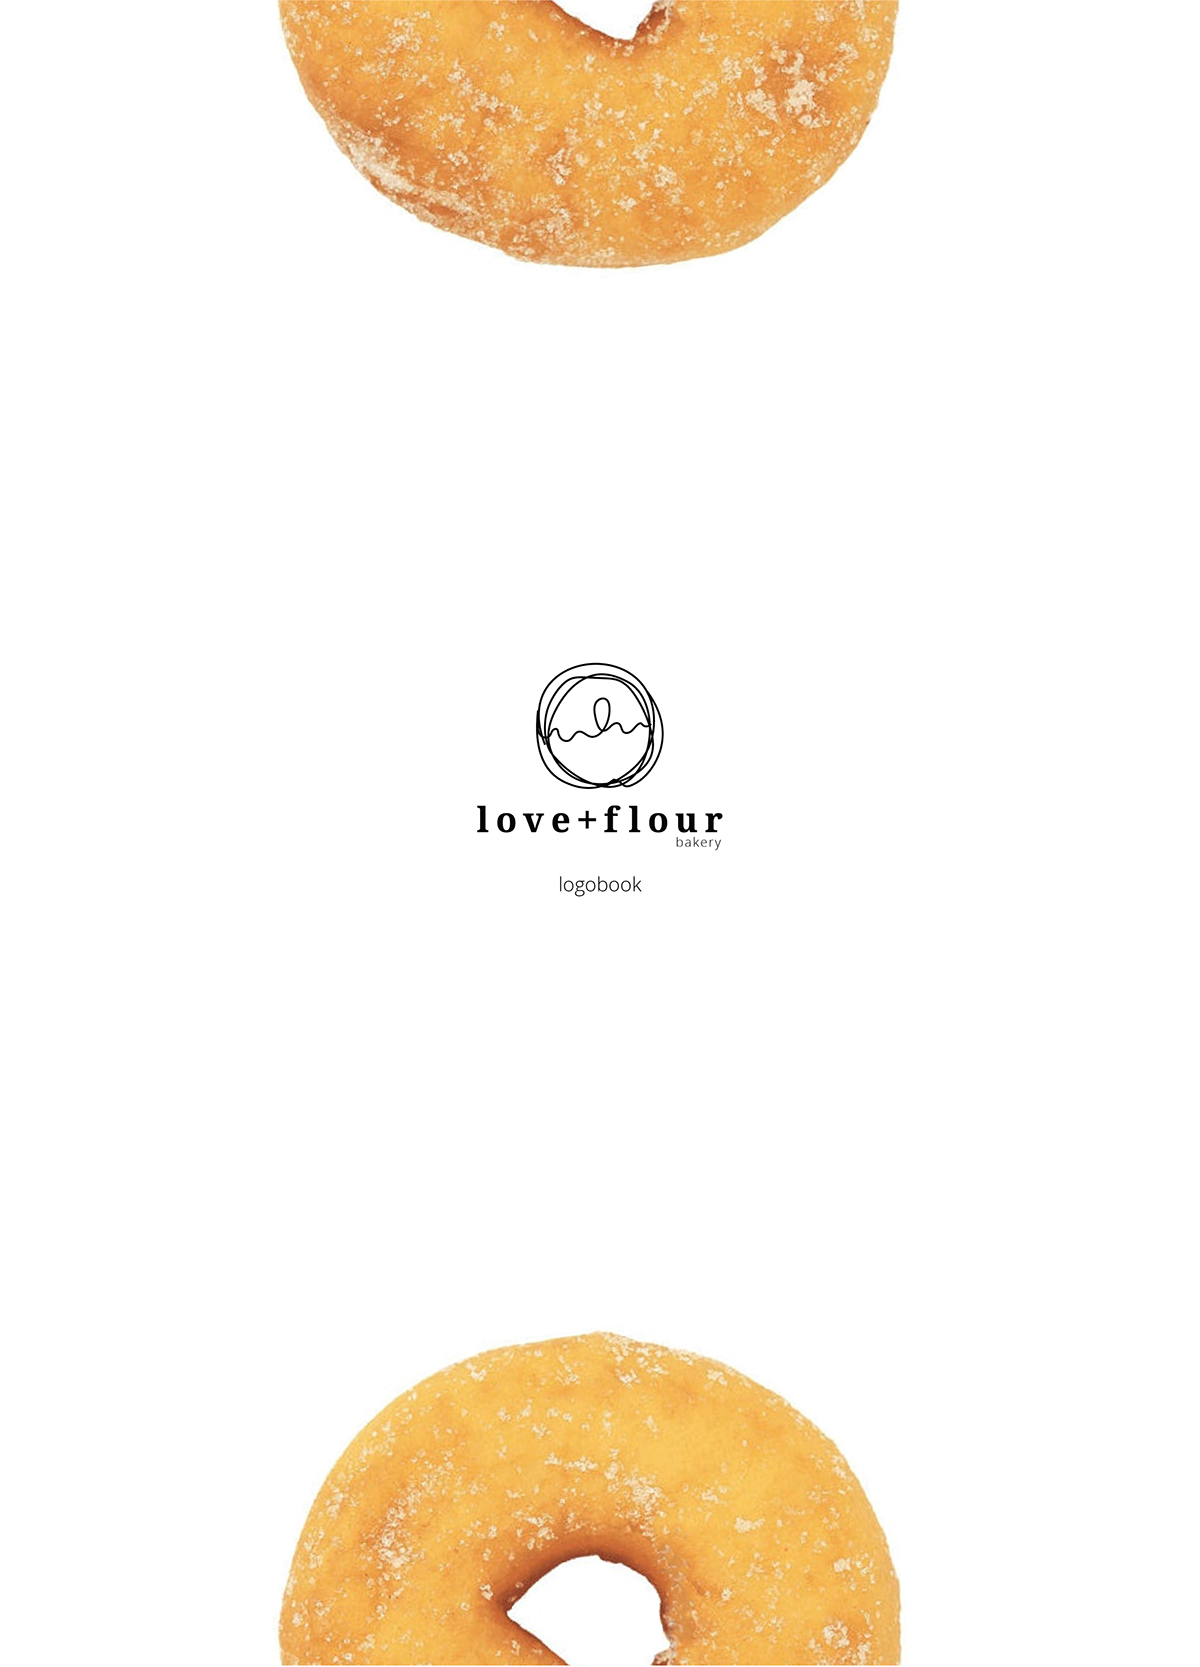 identity branding  product design graphic design  logo Packaging bakery donut business card